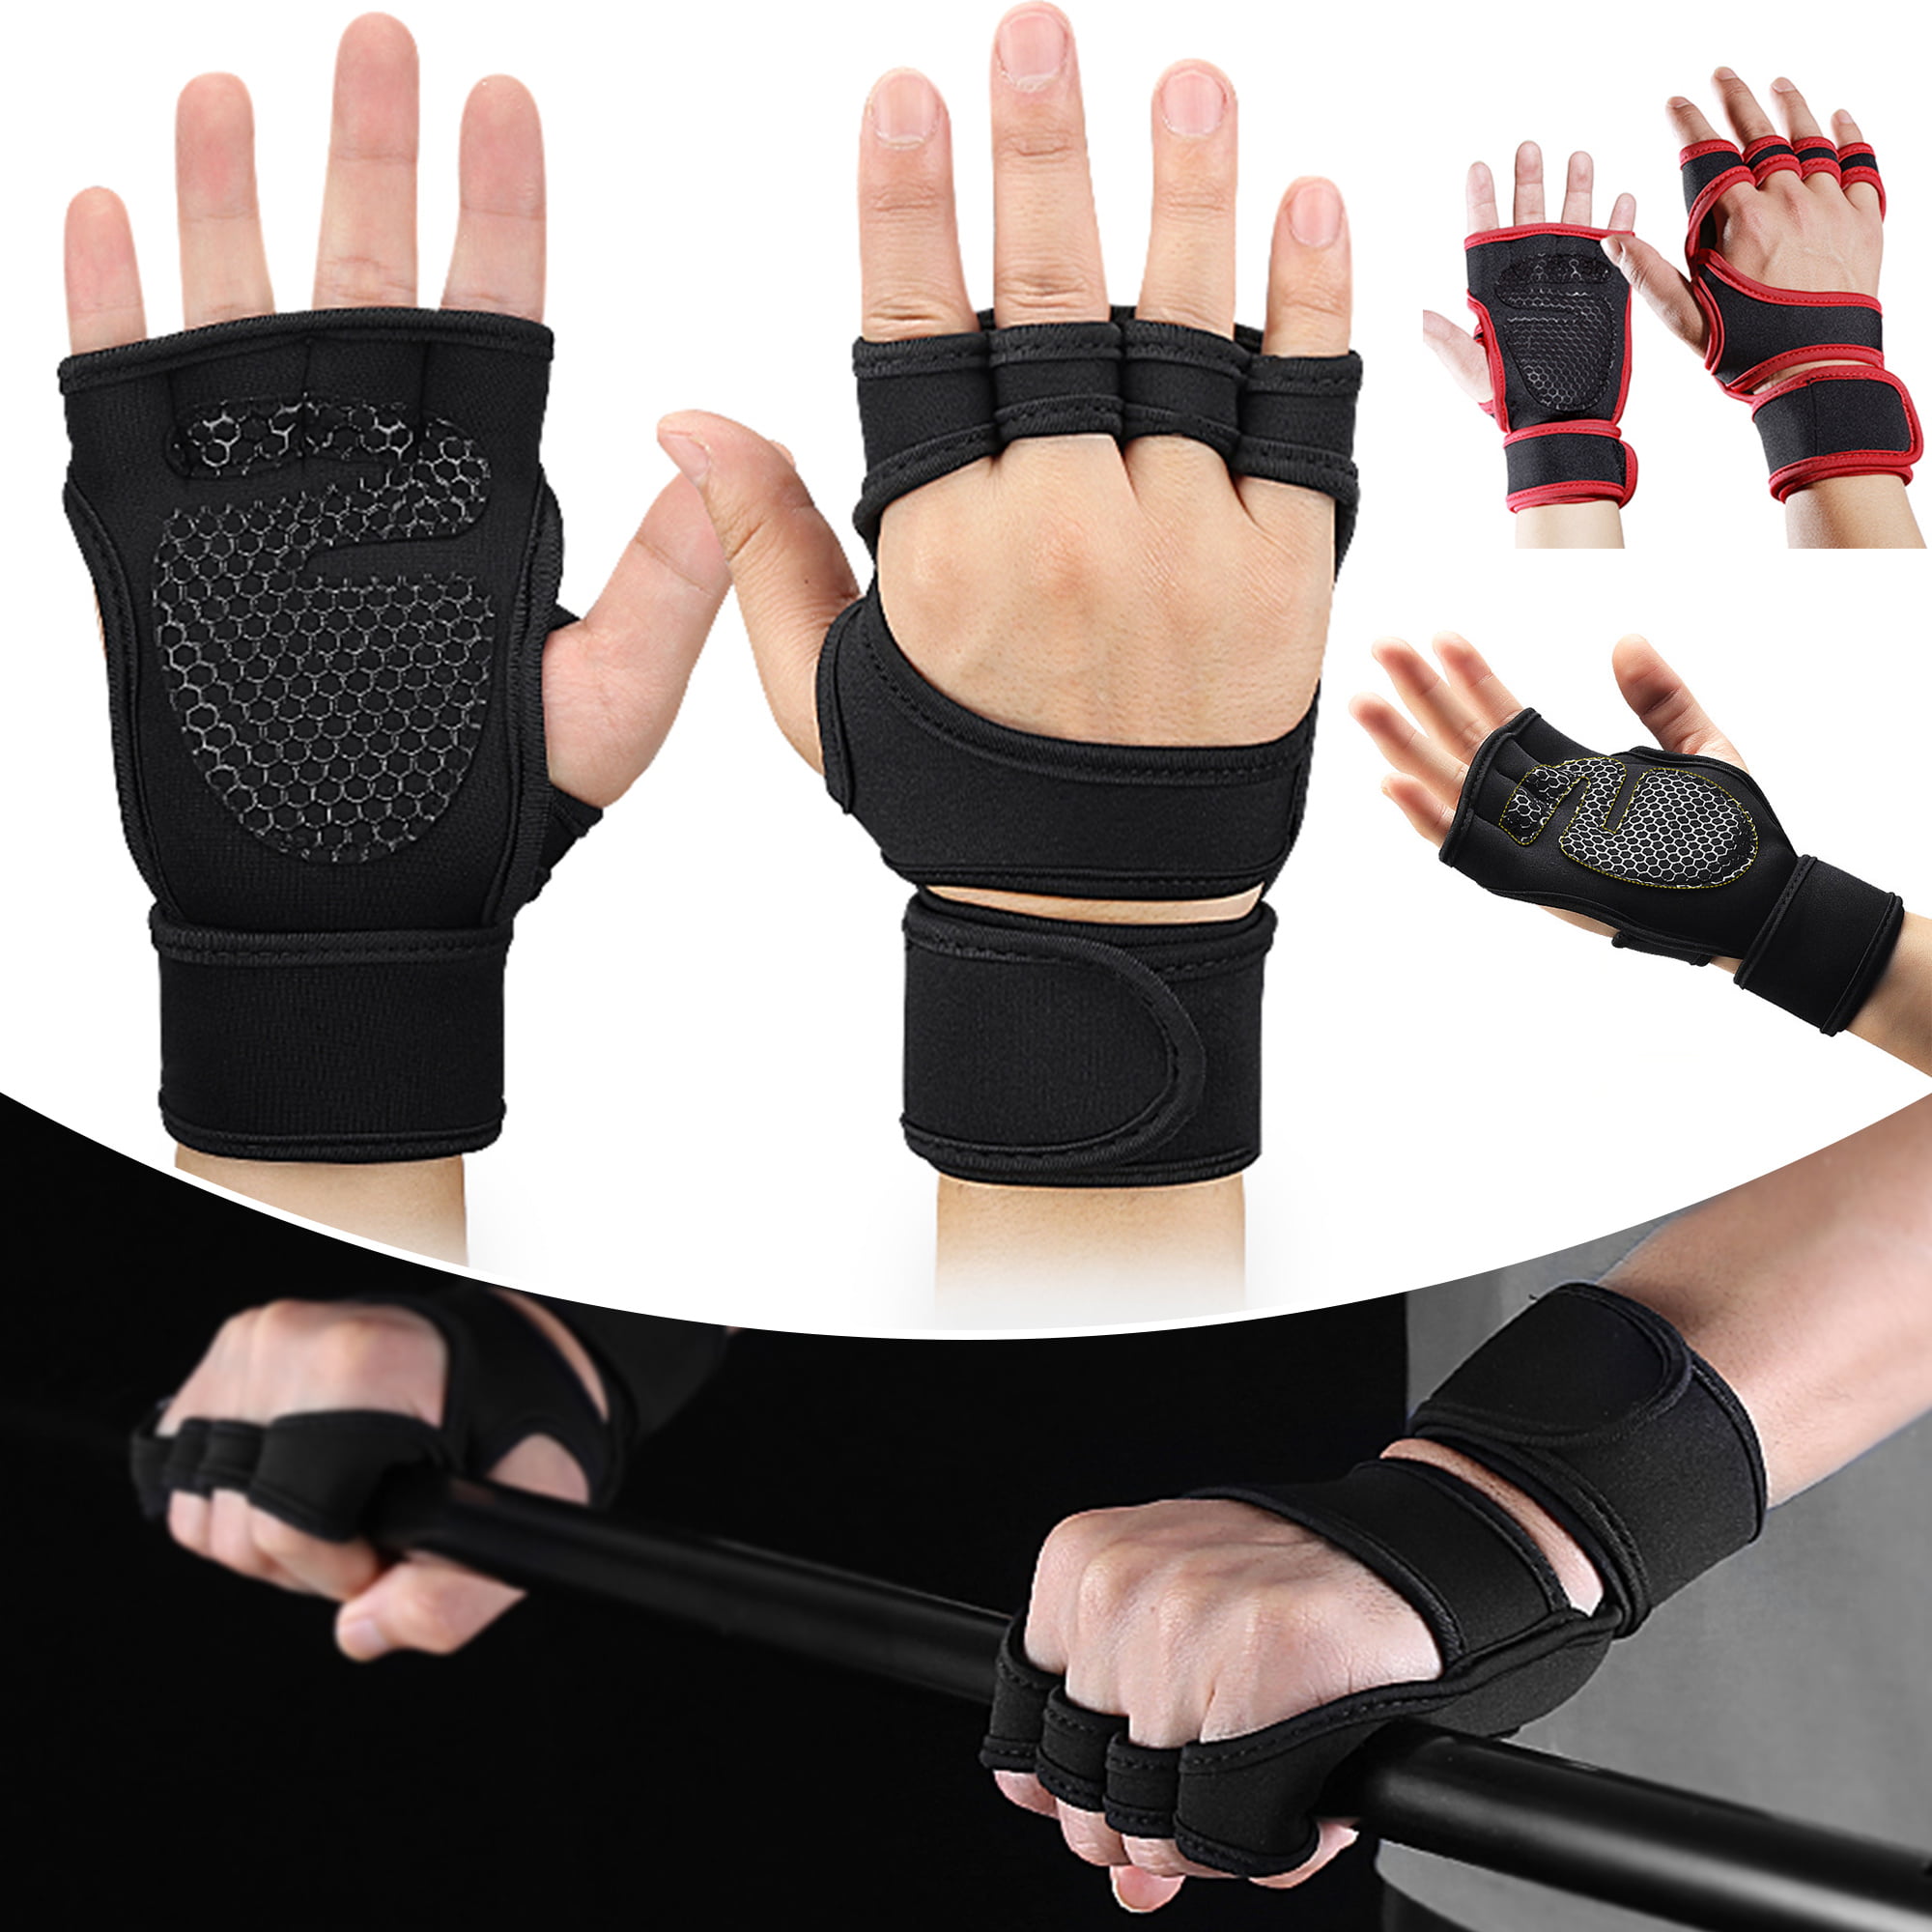 Fitness Workout Gloves Women Men Weight Lifting Gym Sport Exercise Training New 